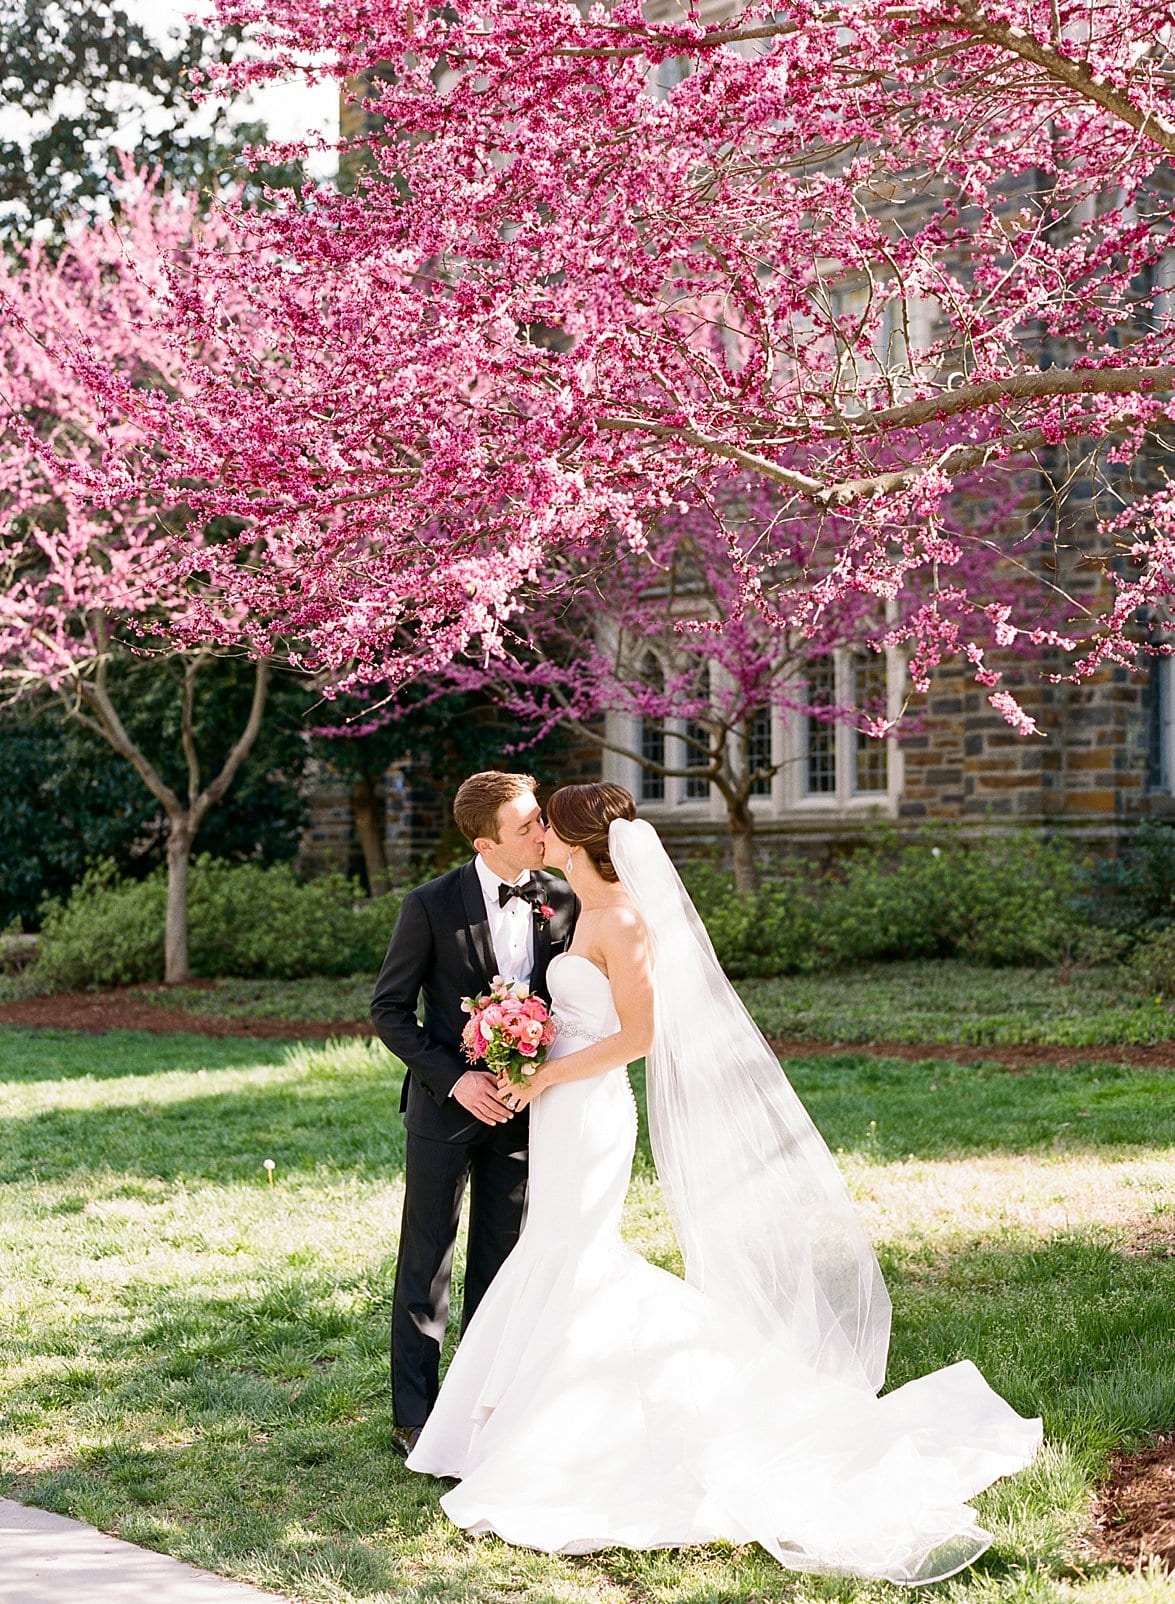 Duke Chapel bride and groom kissing in front of a tree with pink blossoms photo